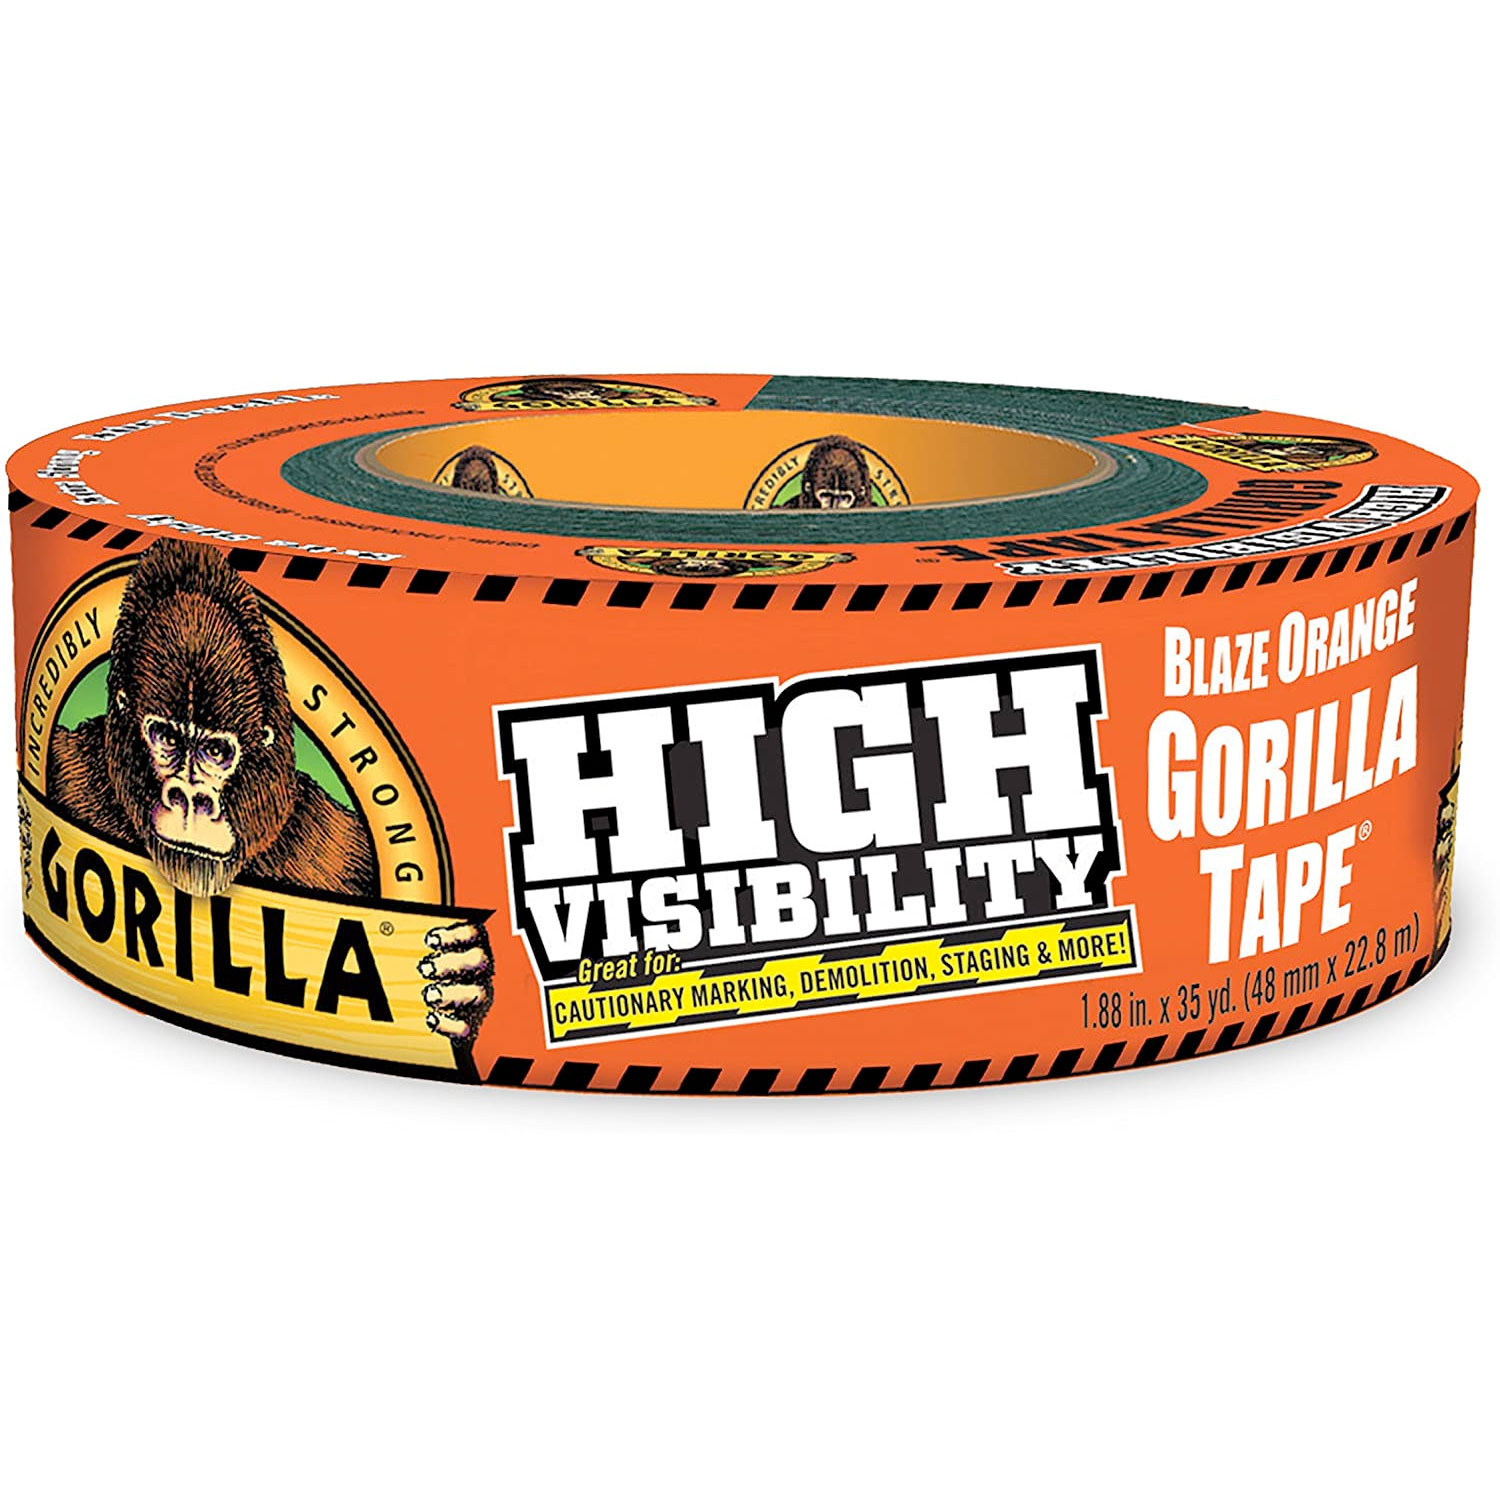 Amazon：Gorilla High Visibility Duct Tape (1.88 in x 35 yd)只賣$14.27